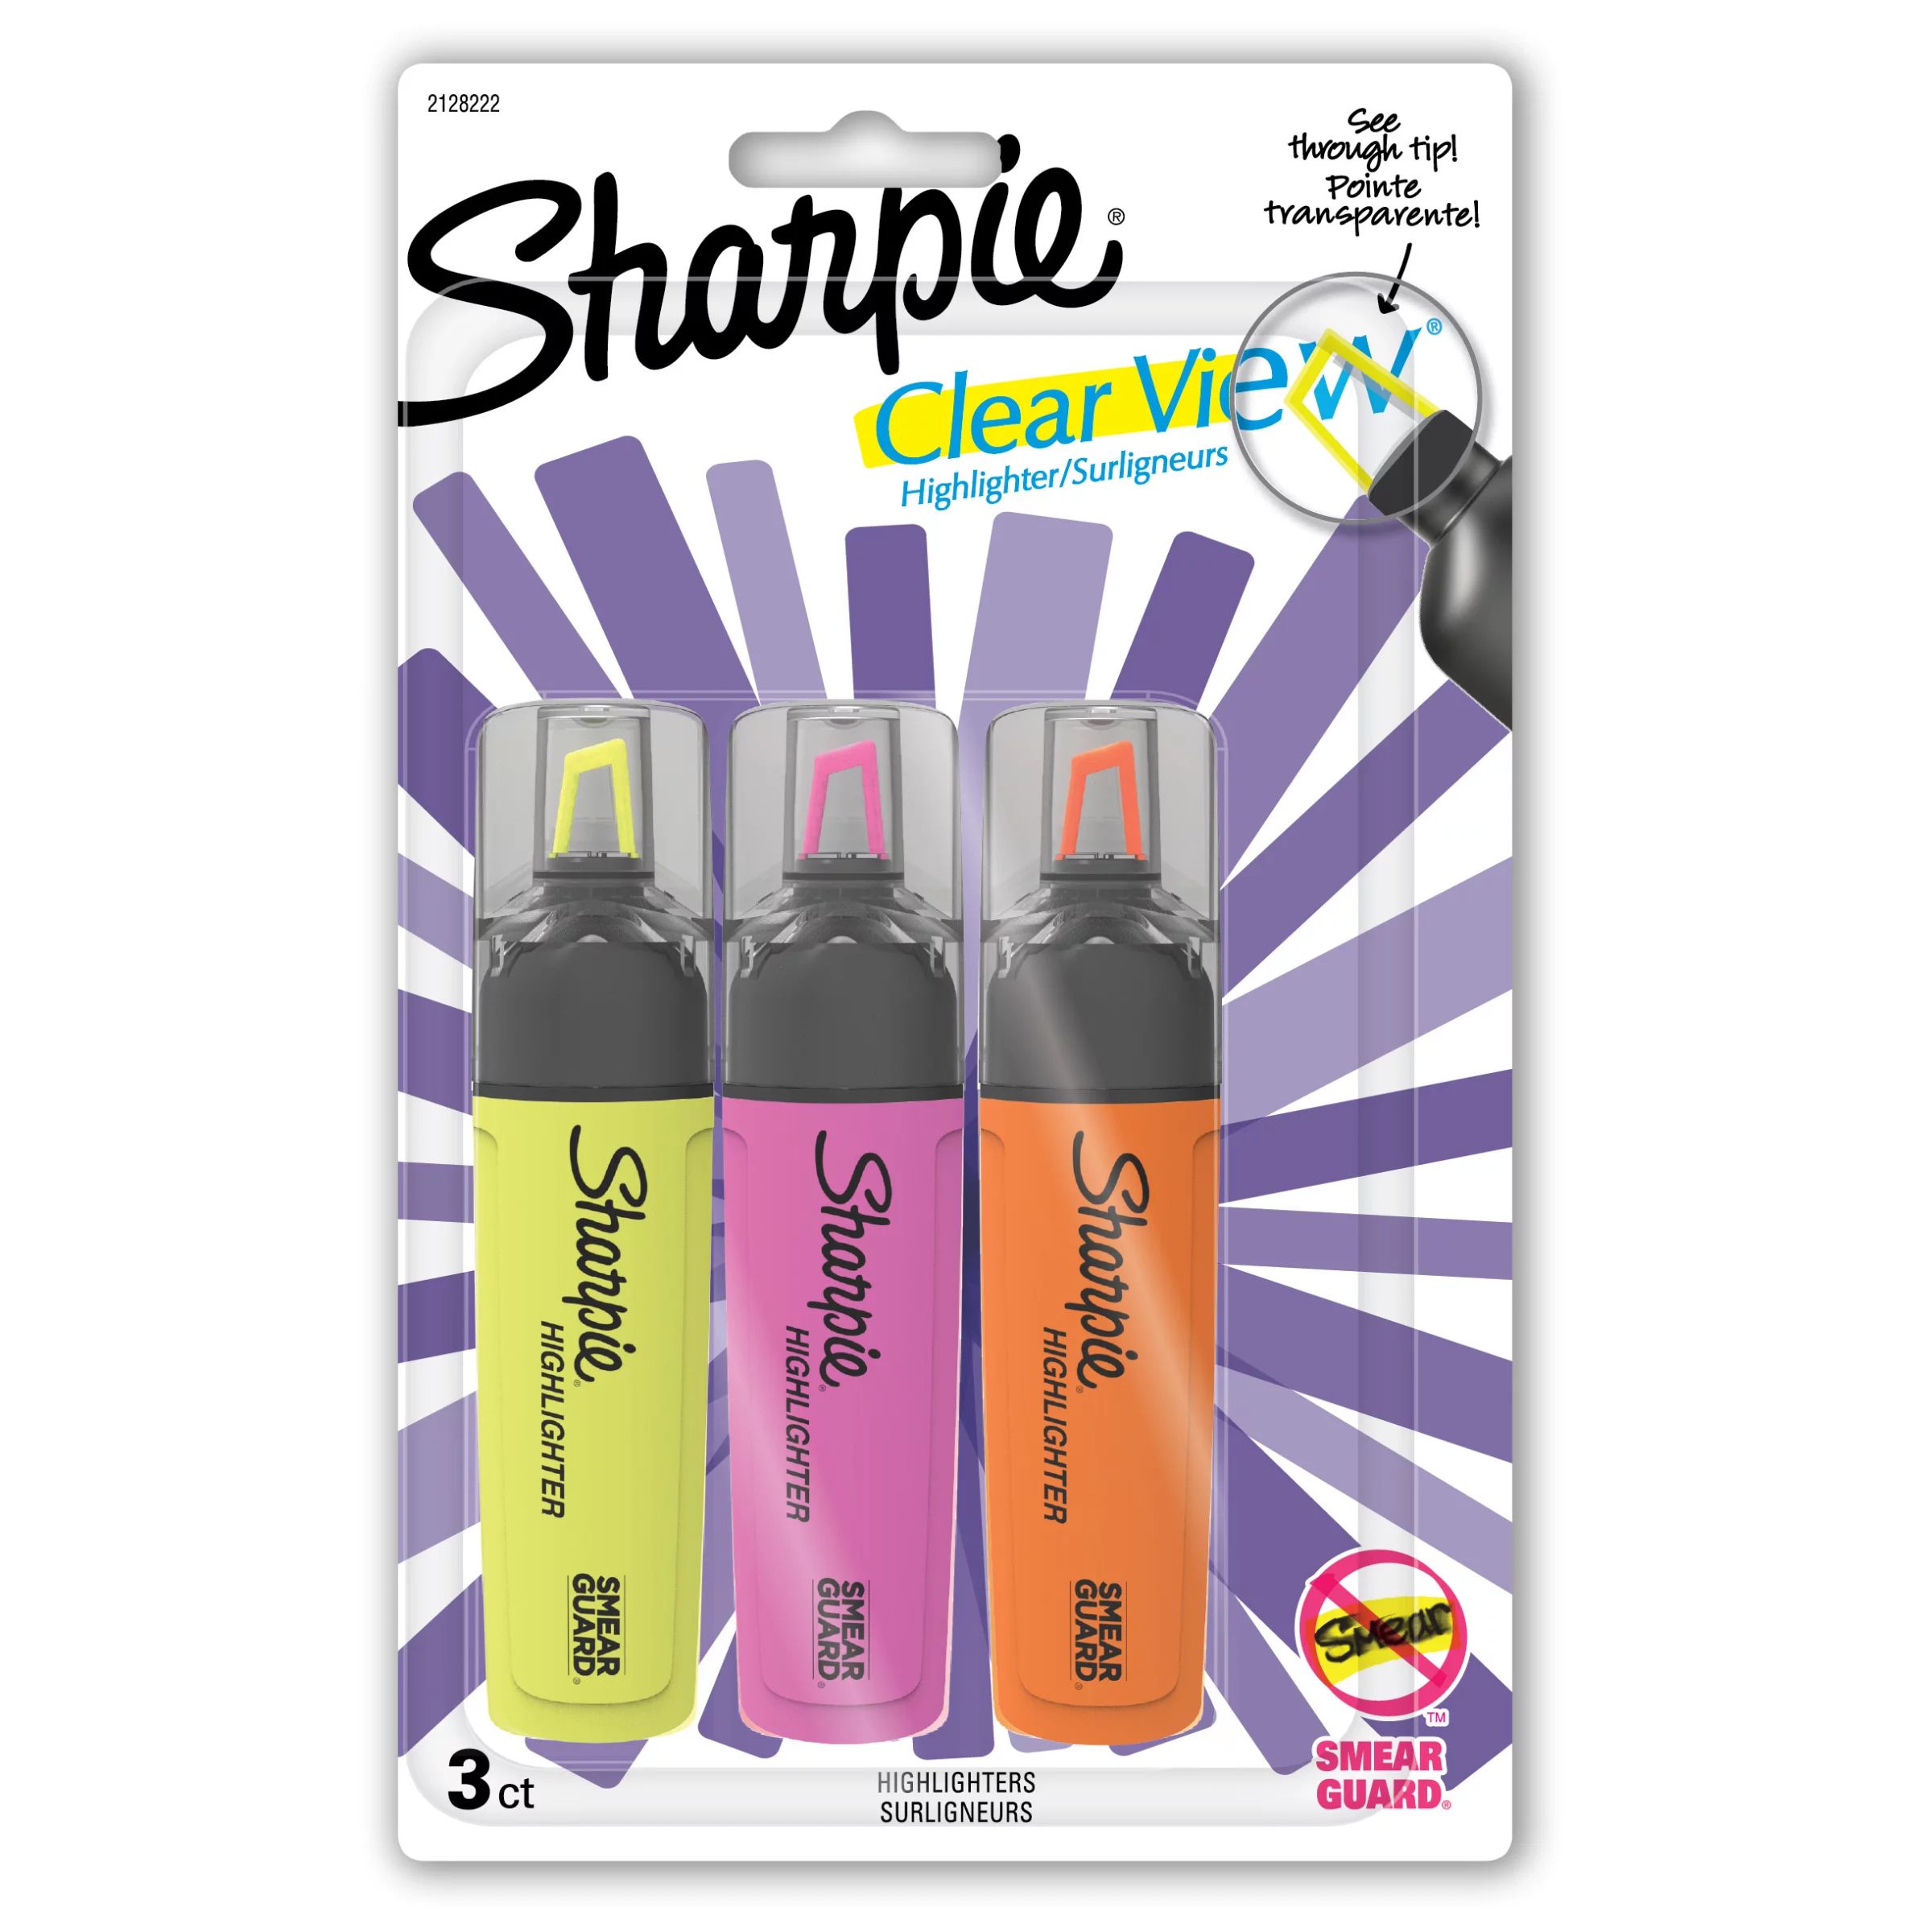 Sharpie Highlighter, Clear View Highlighter with See-Through Chisel Tip, Tank Highlighter, Assort... | Walmart (US)